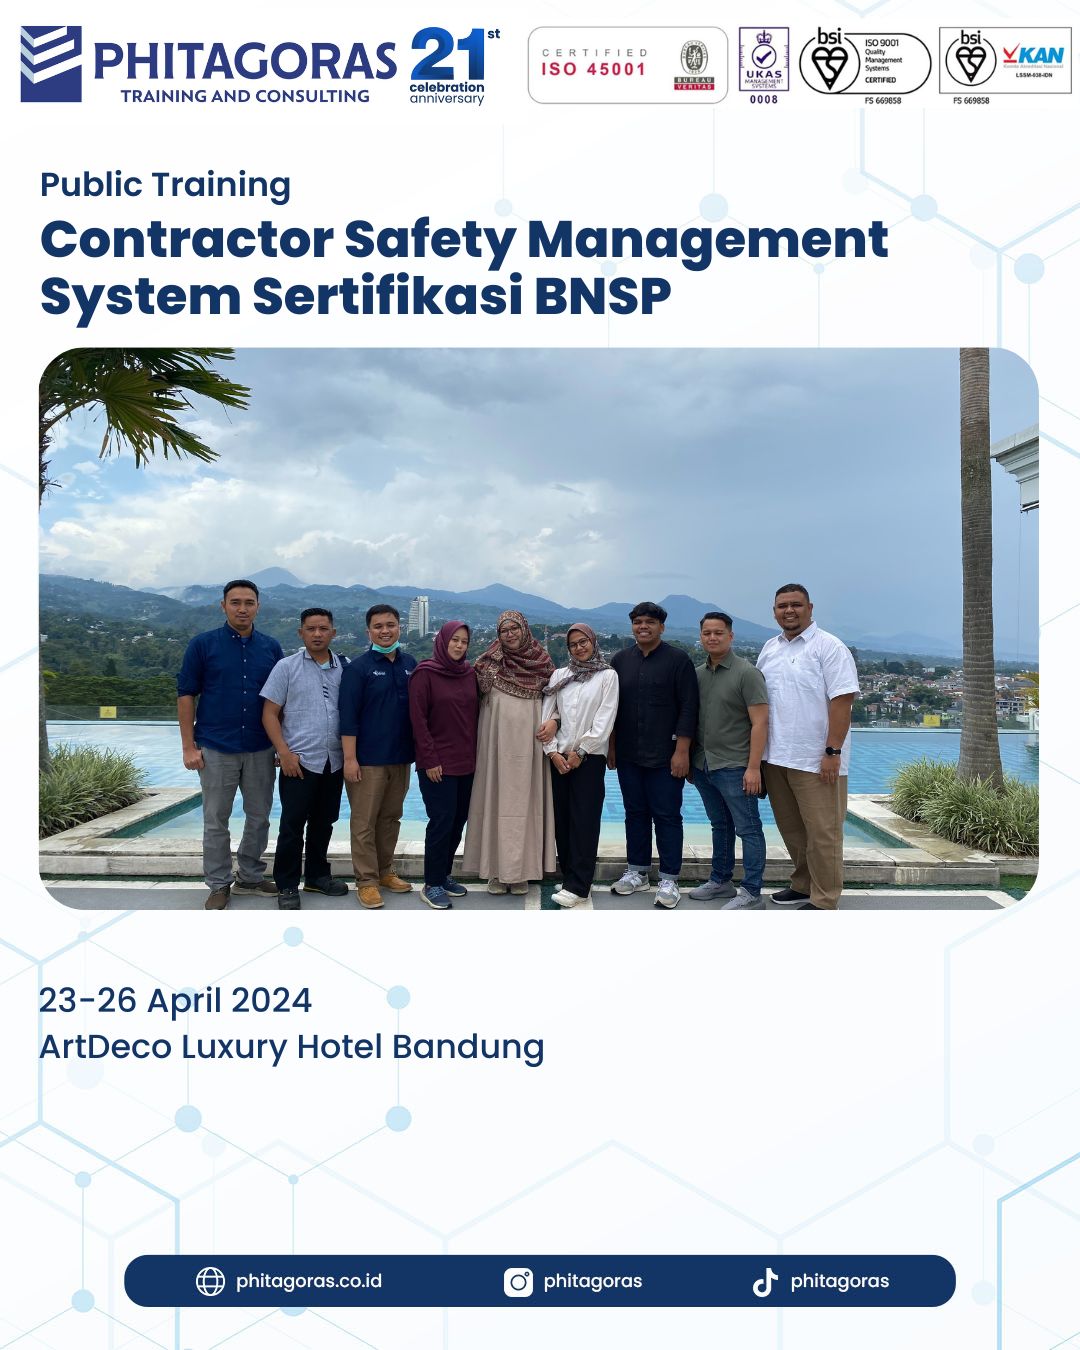 Public Training Contractor Safety Management System Sertifikasi BNSP 23 - 26 April 2024